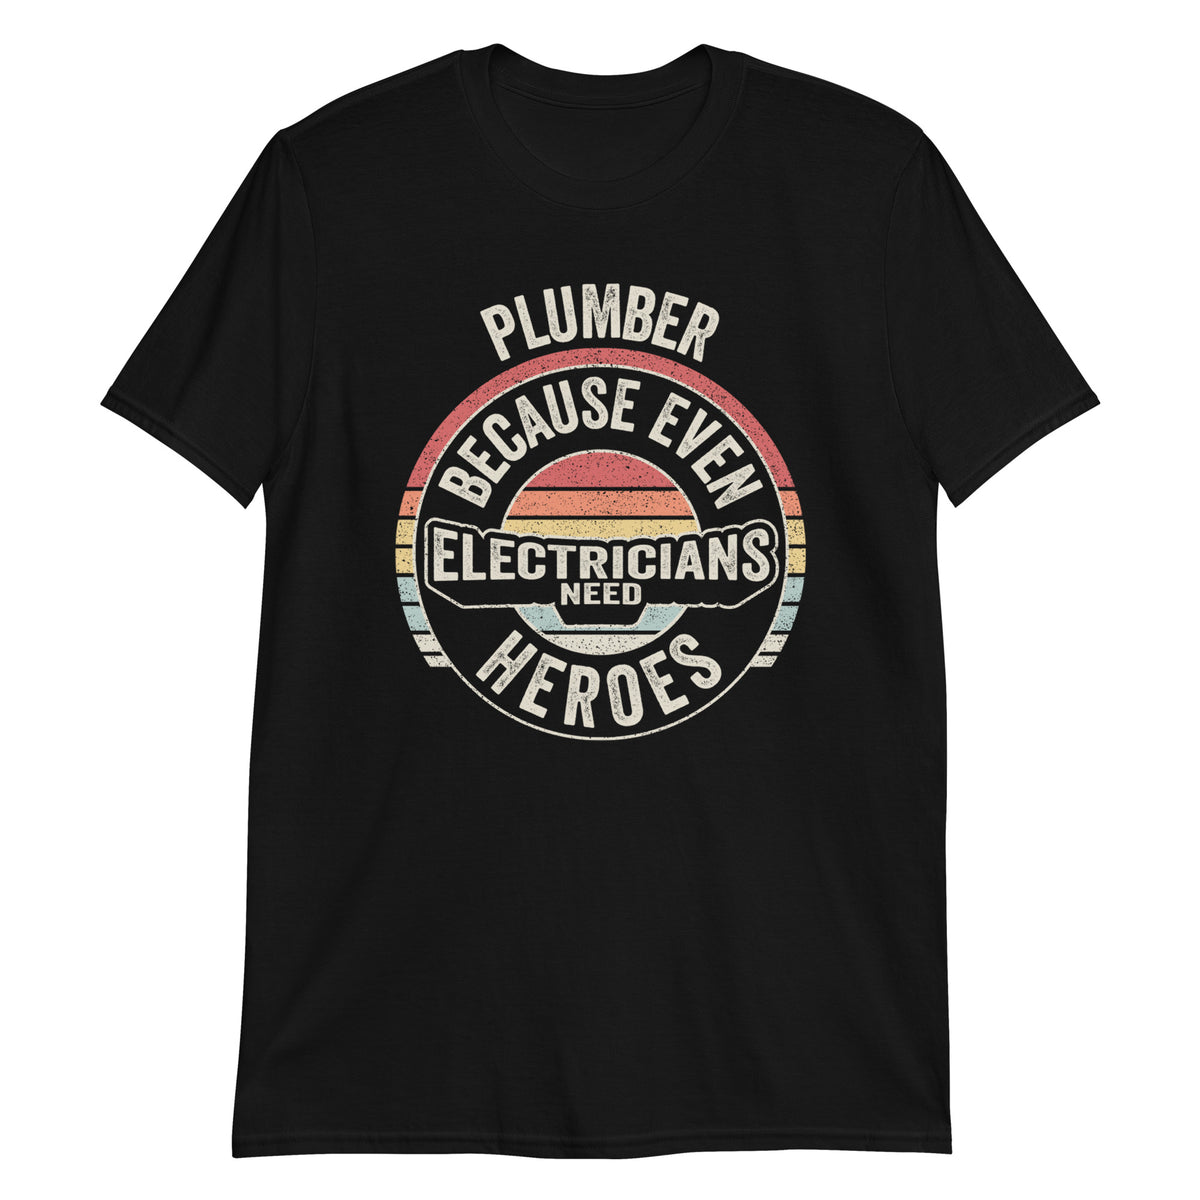 Plumber Because Even Electricians Need Heroes T-Shirt